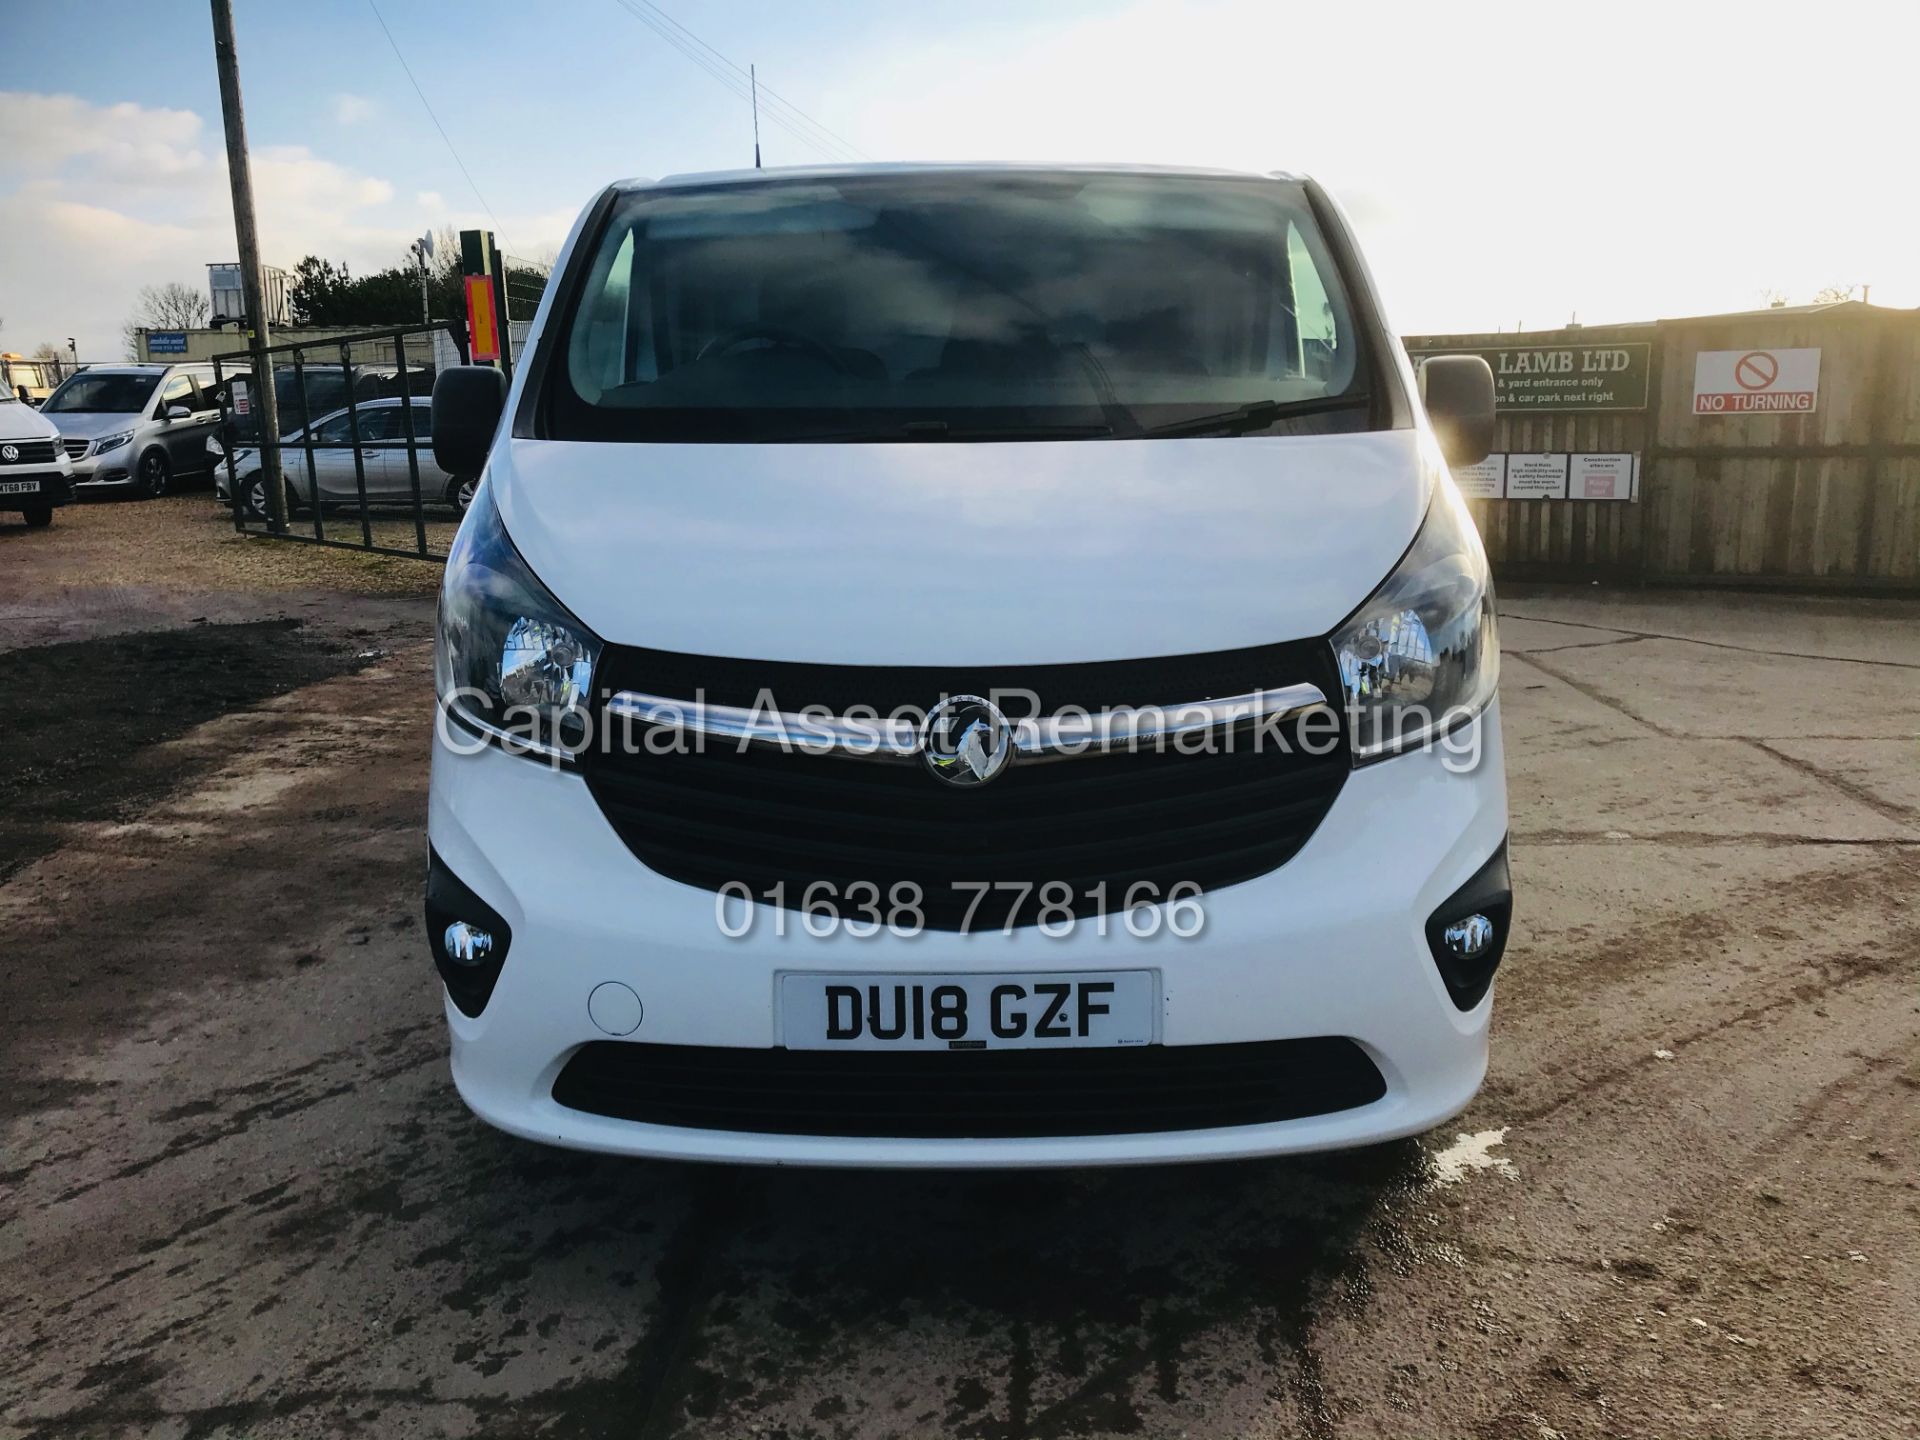 ON SALE VAUXHALL VIVARO CDTI "SPORTIVE" 1 OWNER (18 REG) AIR CON - ELEC PACK - CRUISE - GREAT SPEC - Image 4 of 25